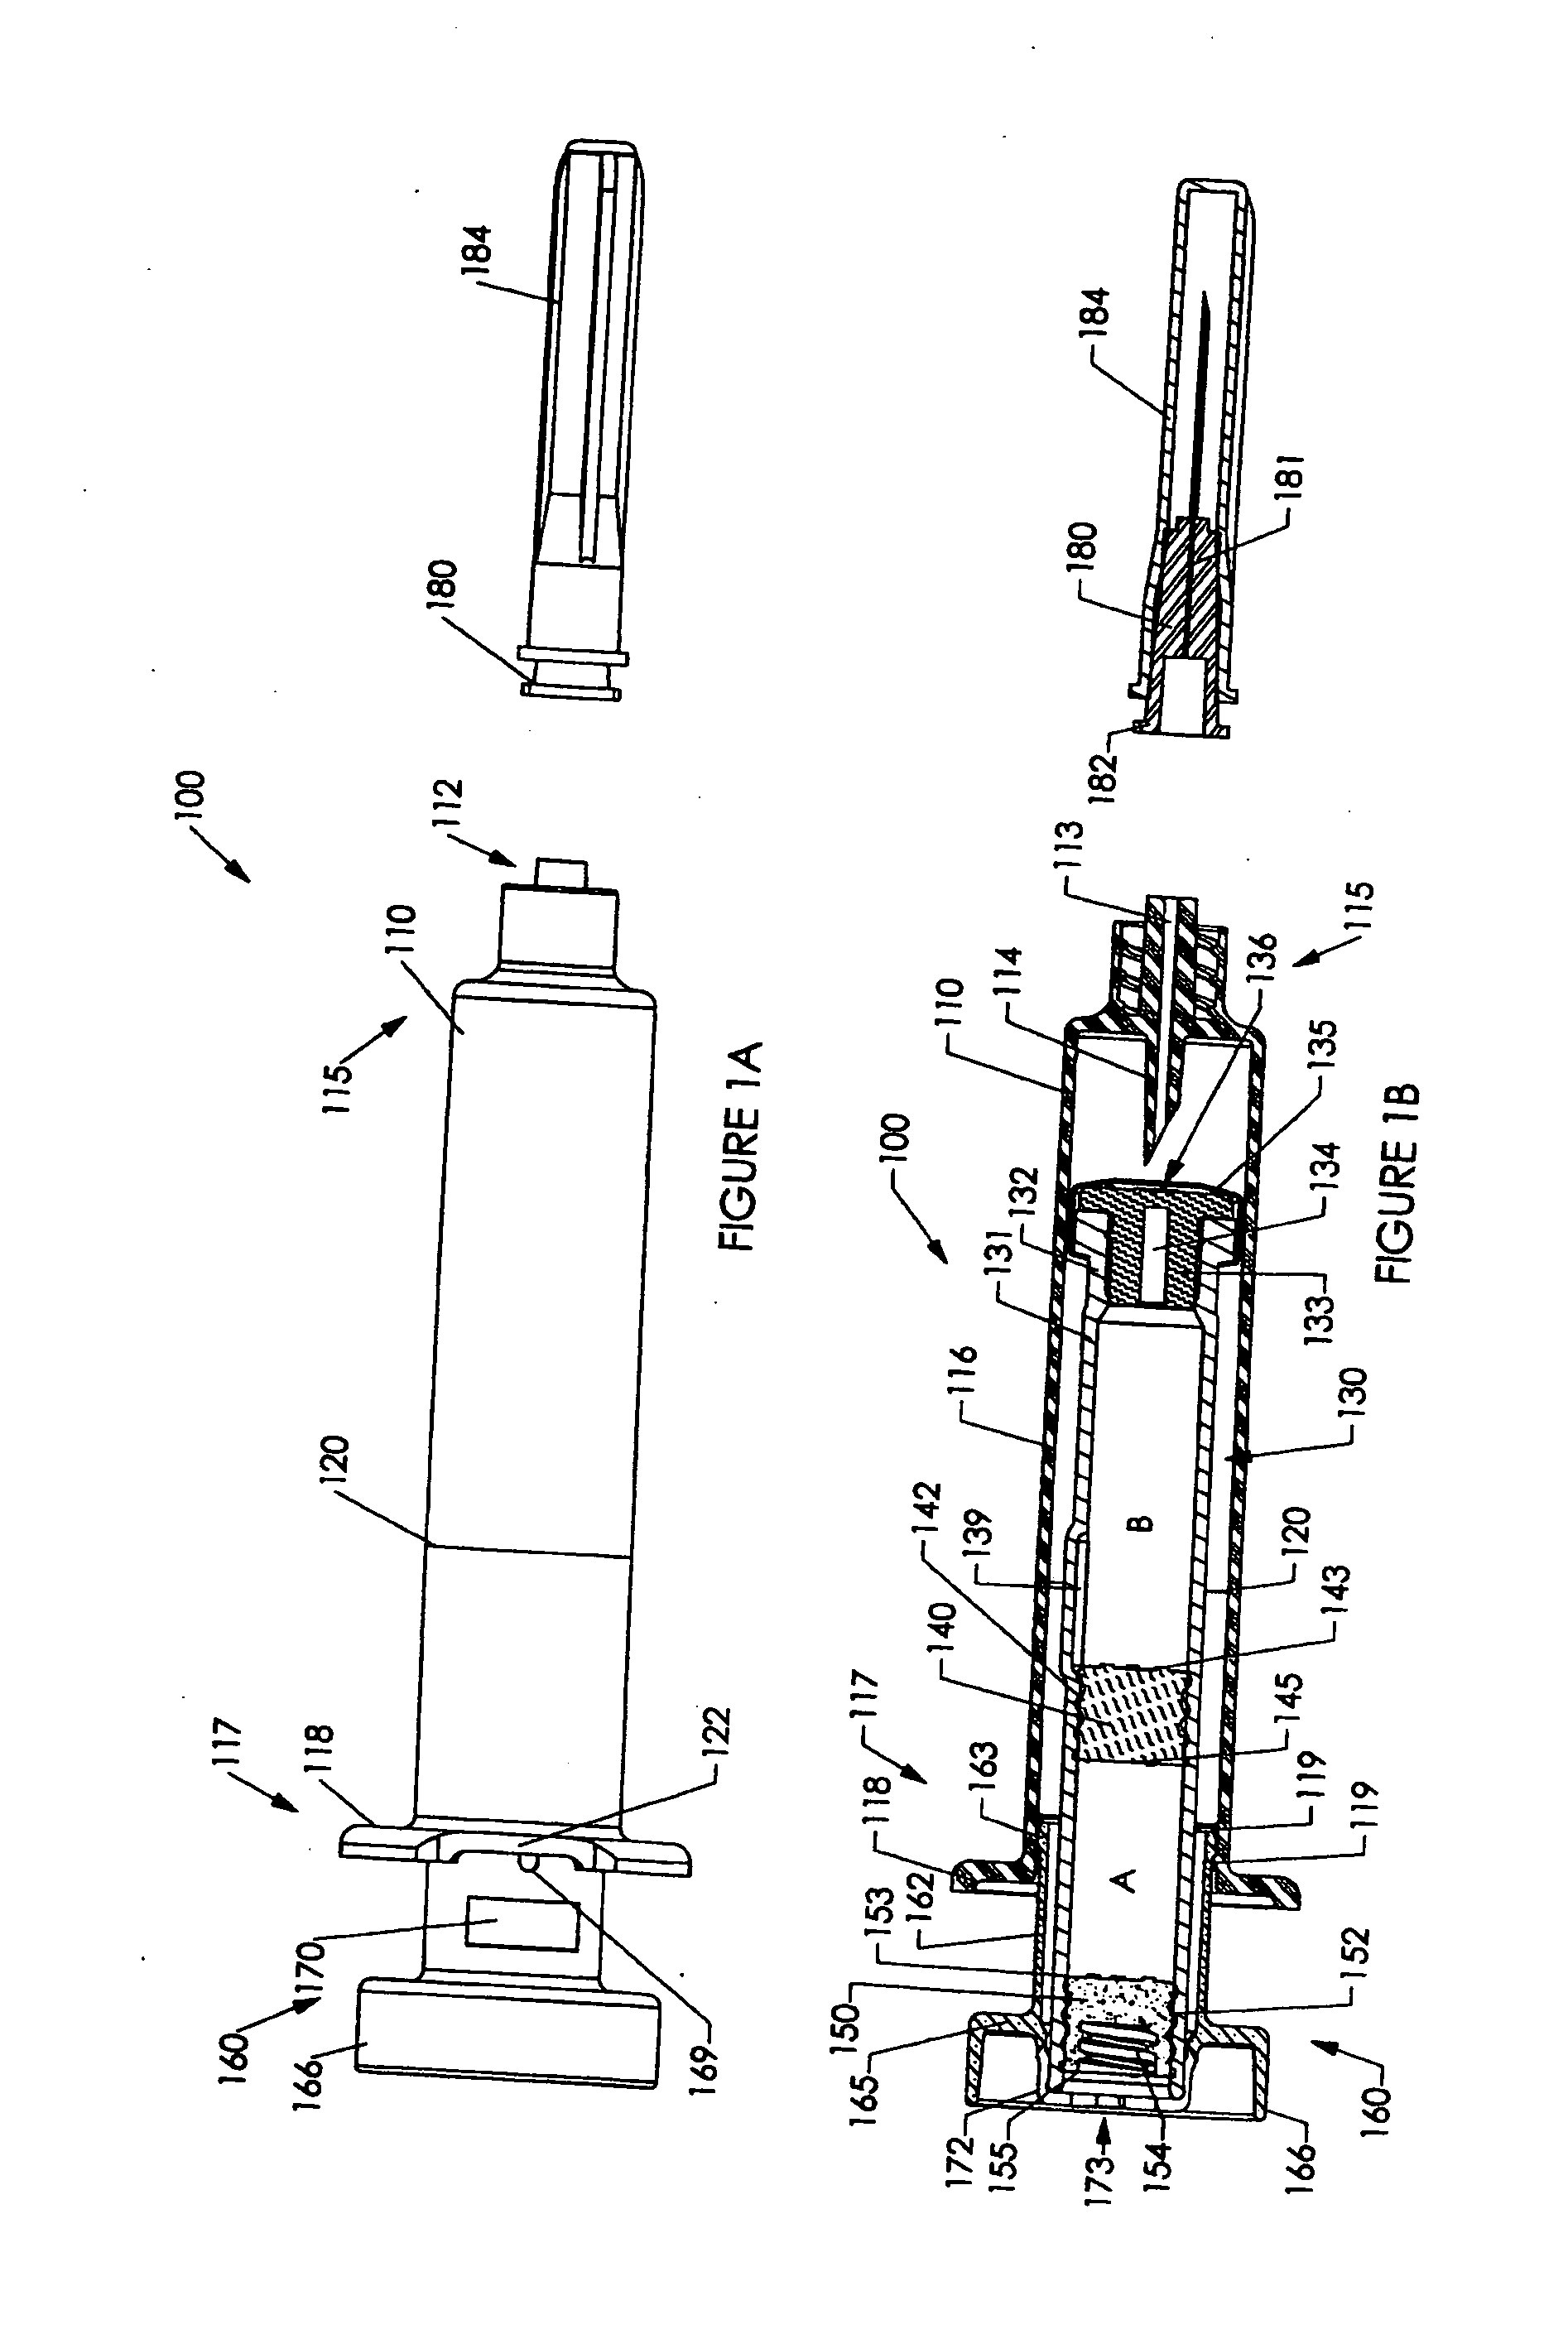 Pharmaceutical cartridge assembly and method of filling same